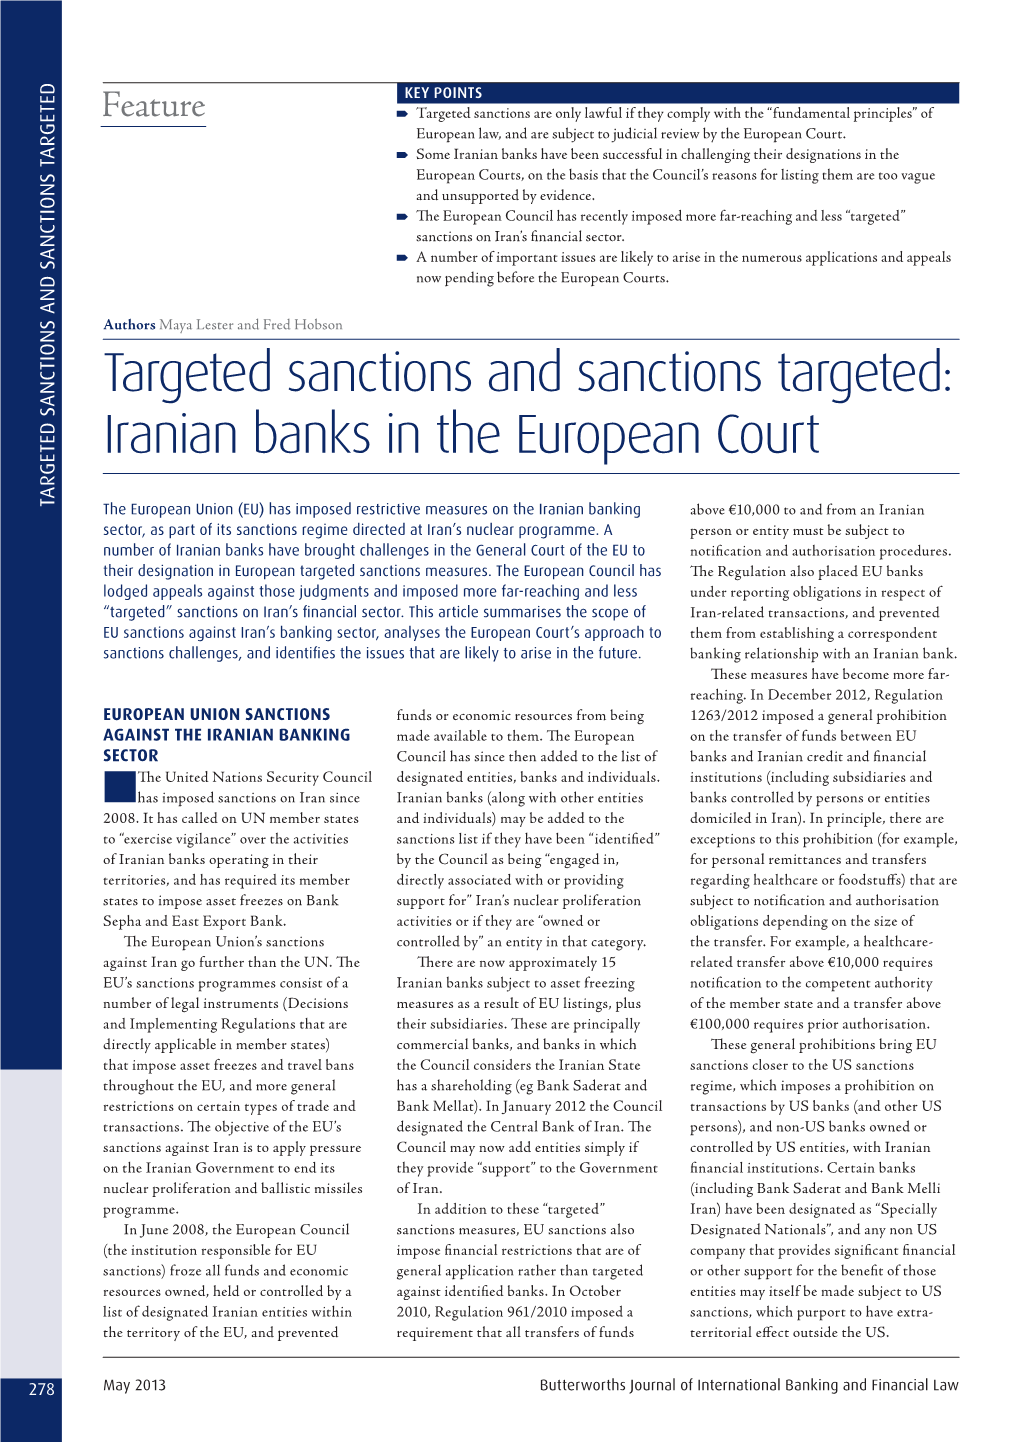 Iranian Banks in the European Court